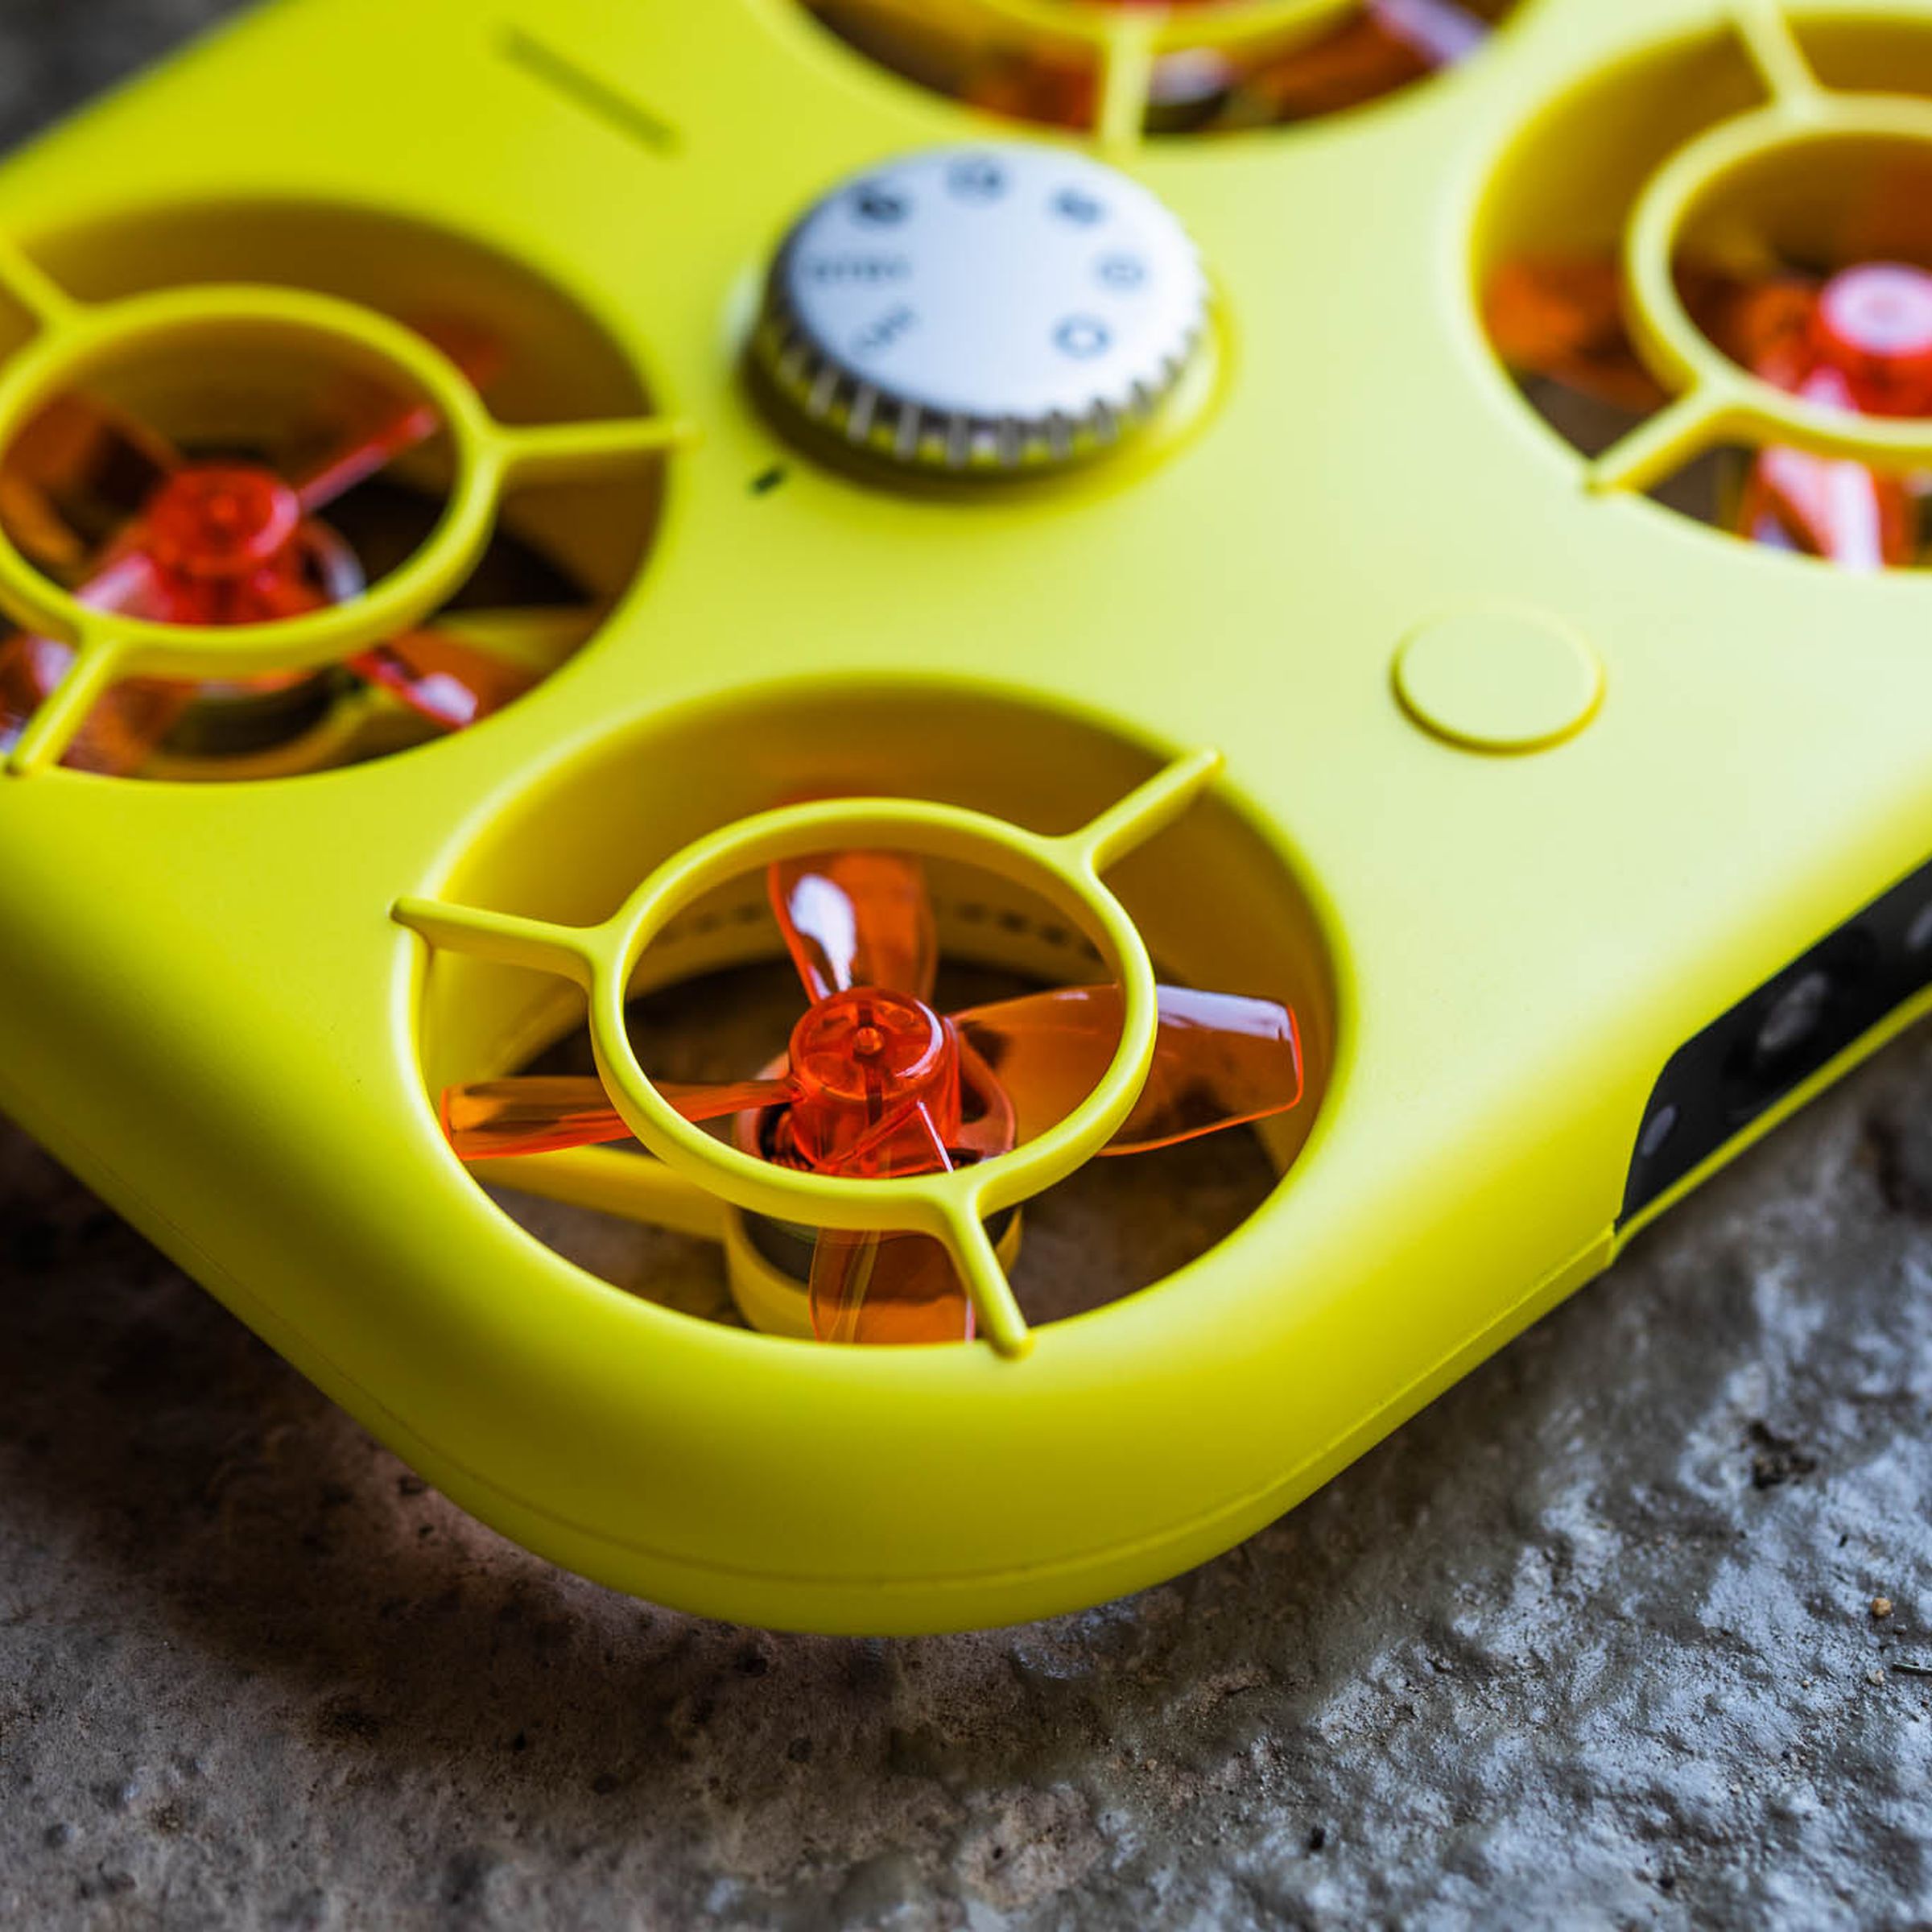 A yellow drone shaped like a rounded rectangle instead of exposed blades — it has translucent orange propellers within its boxy but thin frame.